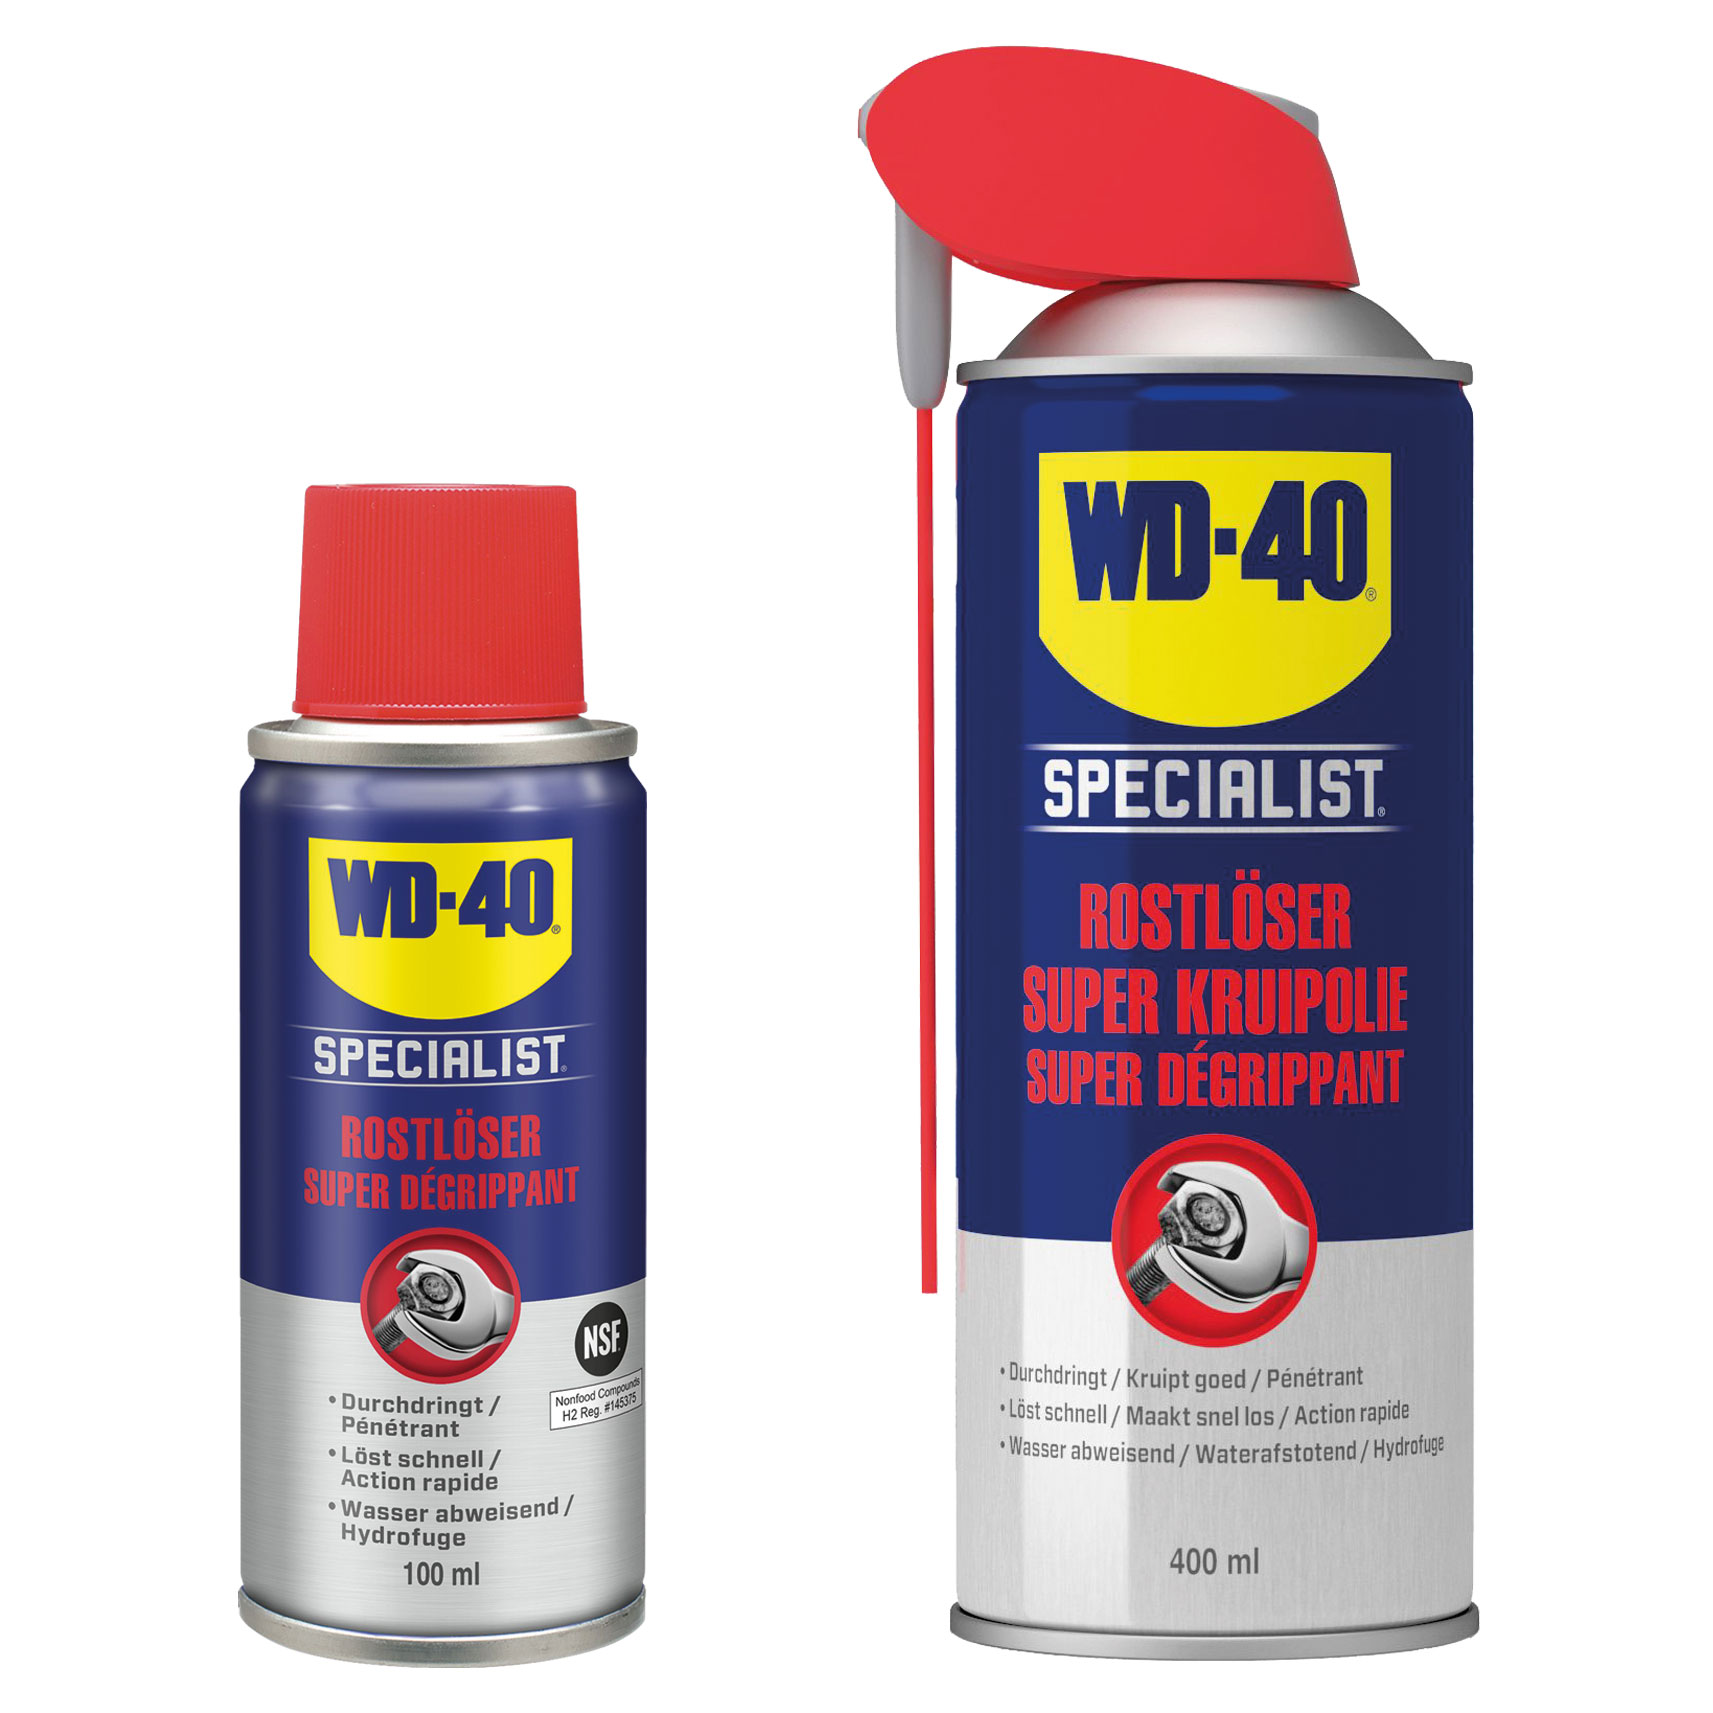 WD-40 SPECIALIST Penetrant 100ml (Actual safety data sheet on the